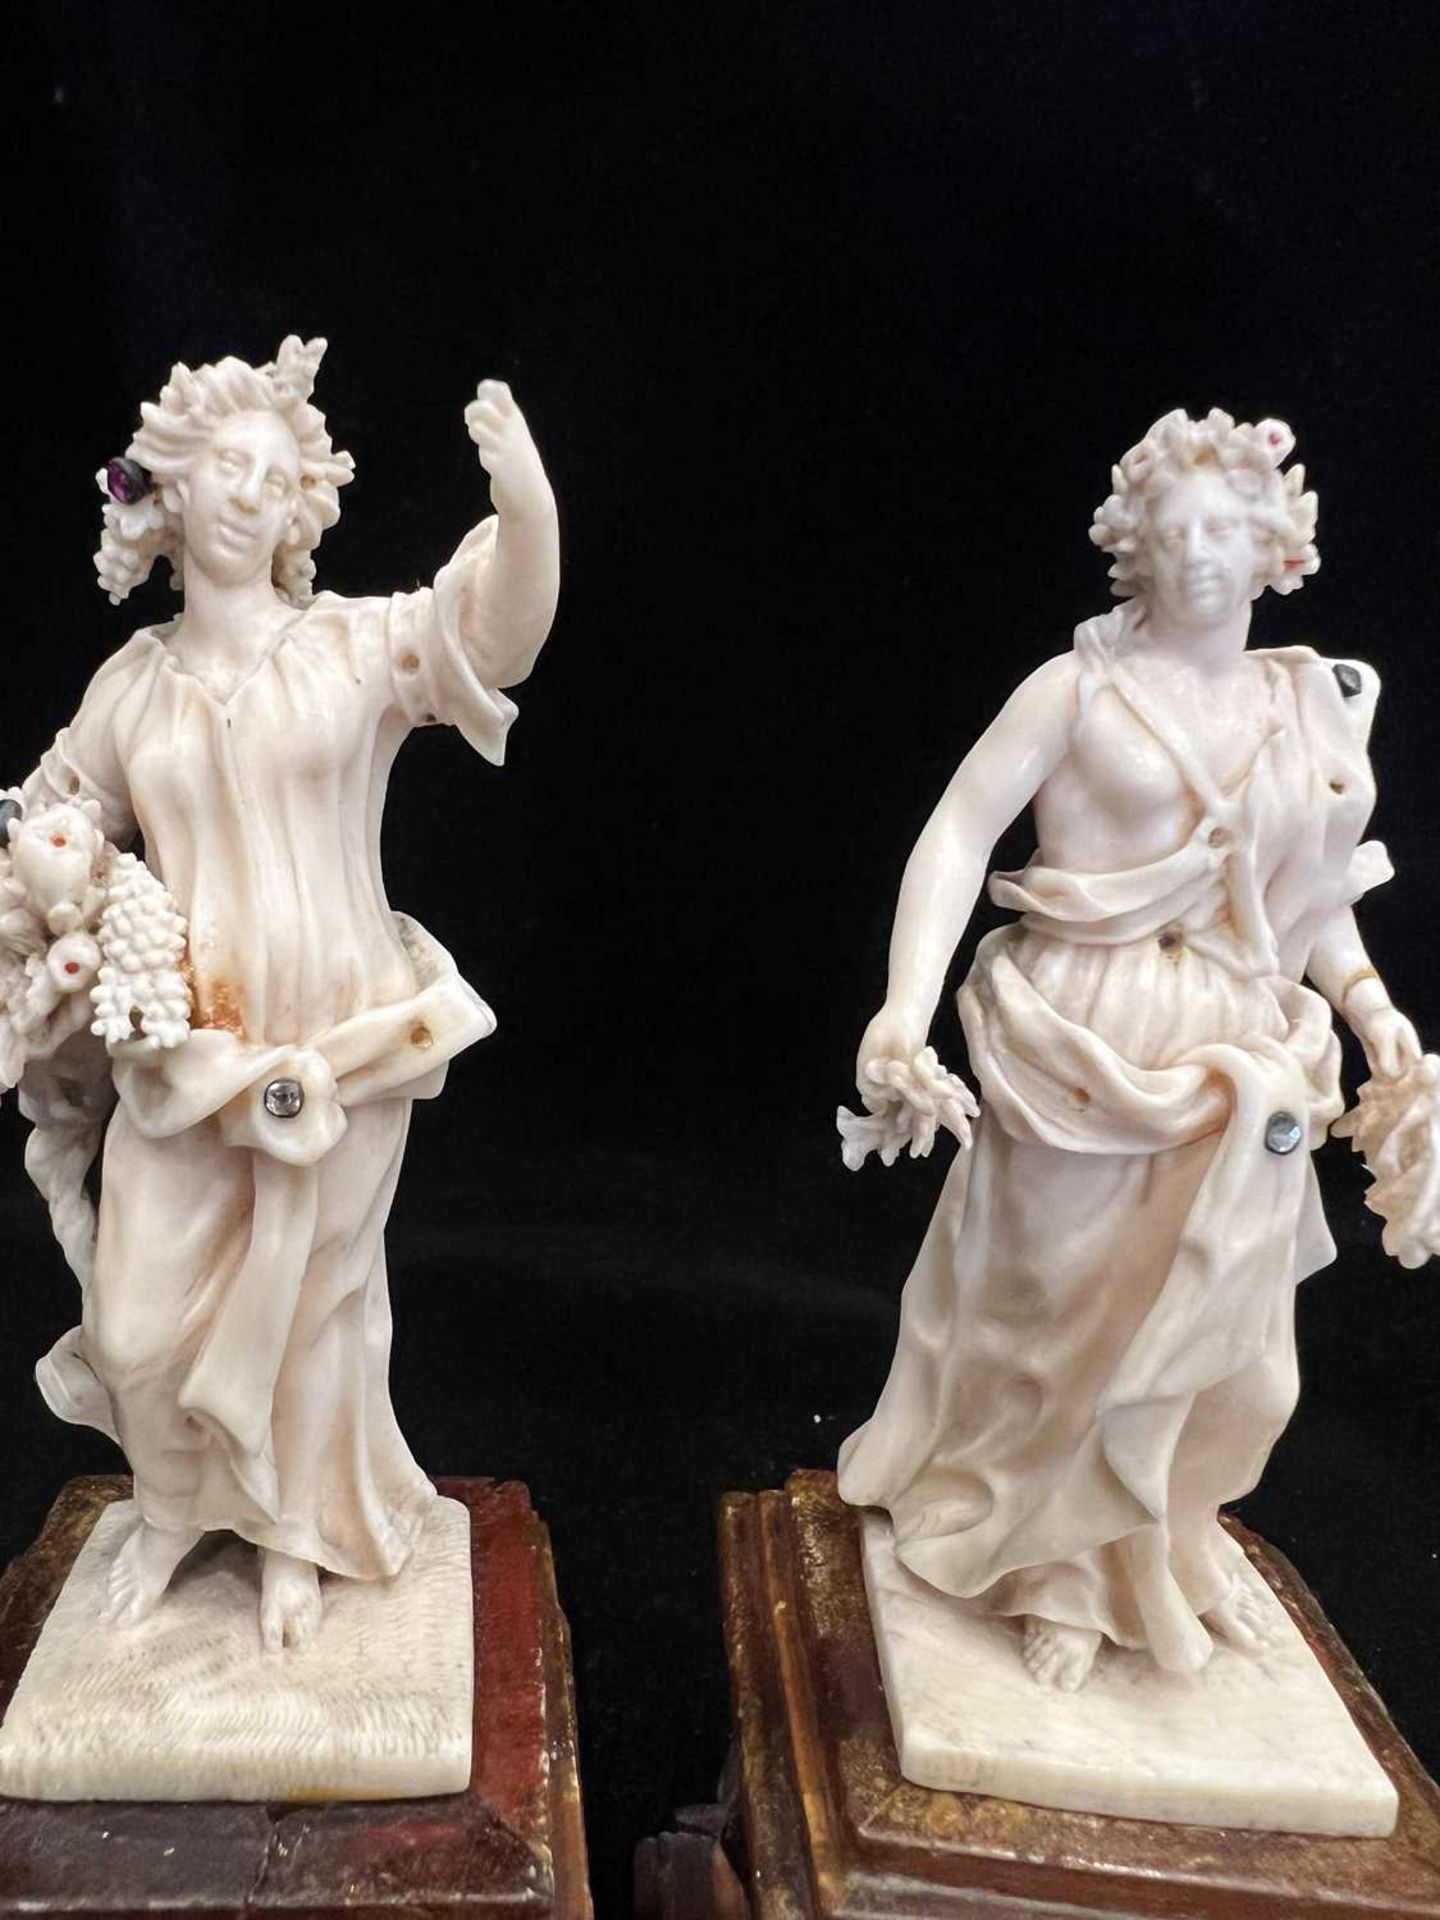 H.R.H PRINCESS MARGARET'S WEDDING GIFT: A PAIR OF 18TH CENTURY IVORY FIGURES OF SPRING AND AUTUMN - Image 7 of 14